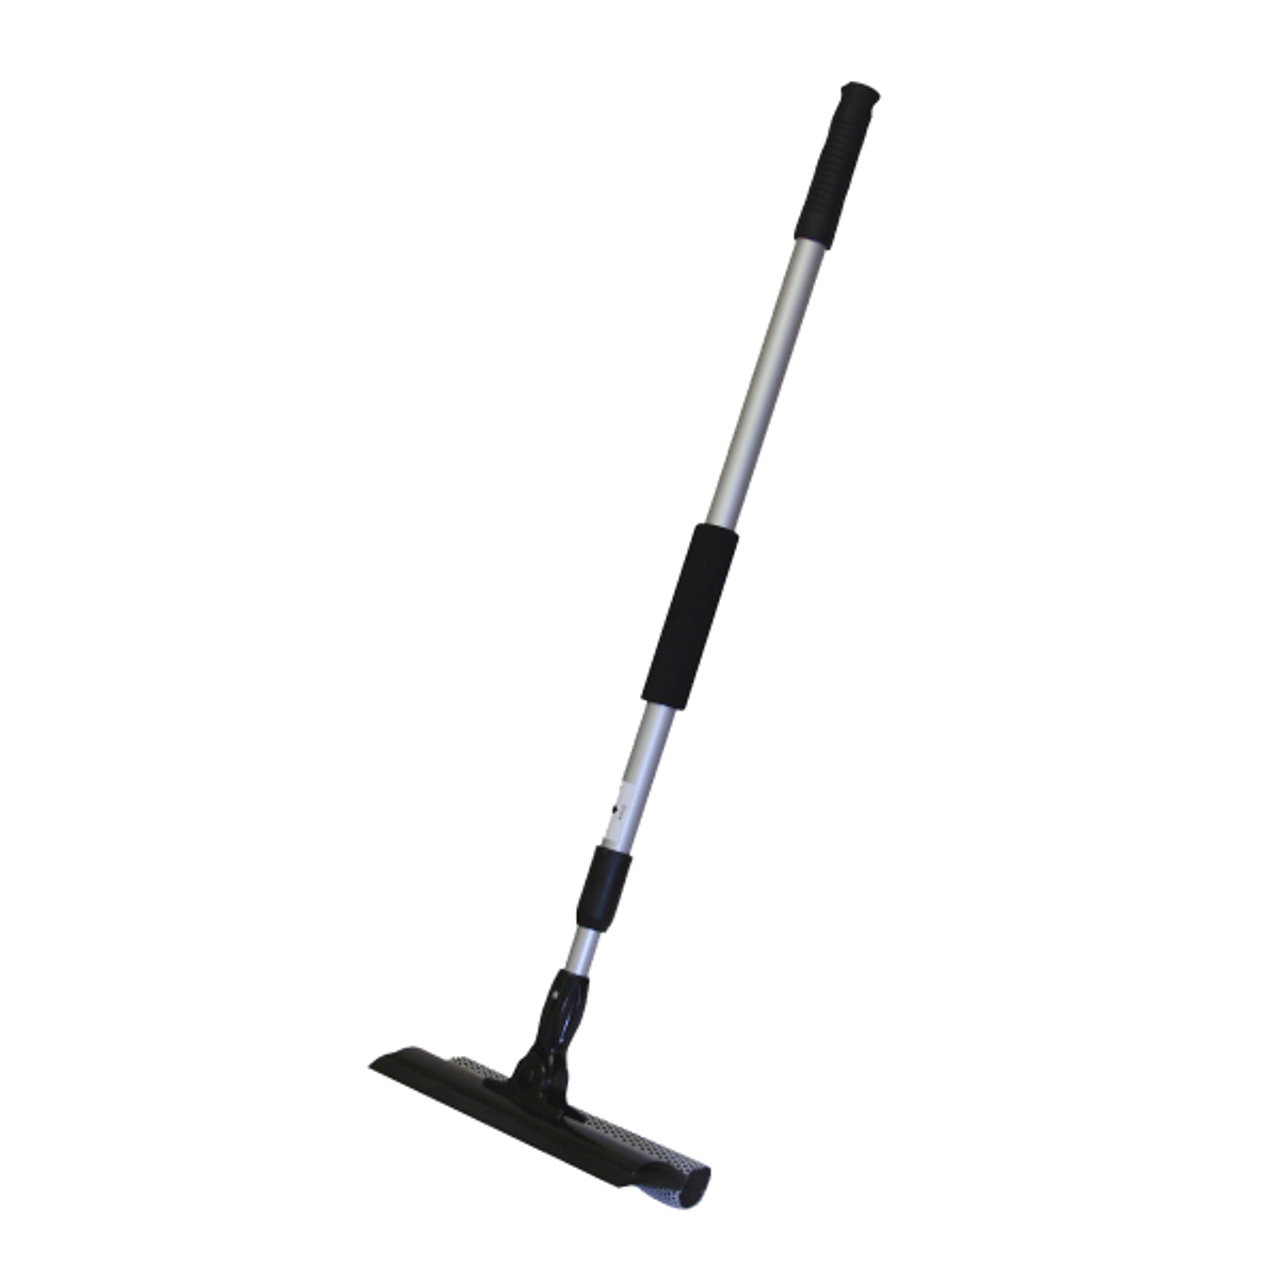 Grip On Telescopic Squeegee |By the Case- 12 per Case|